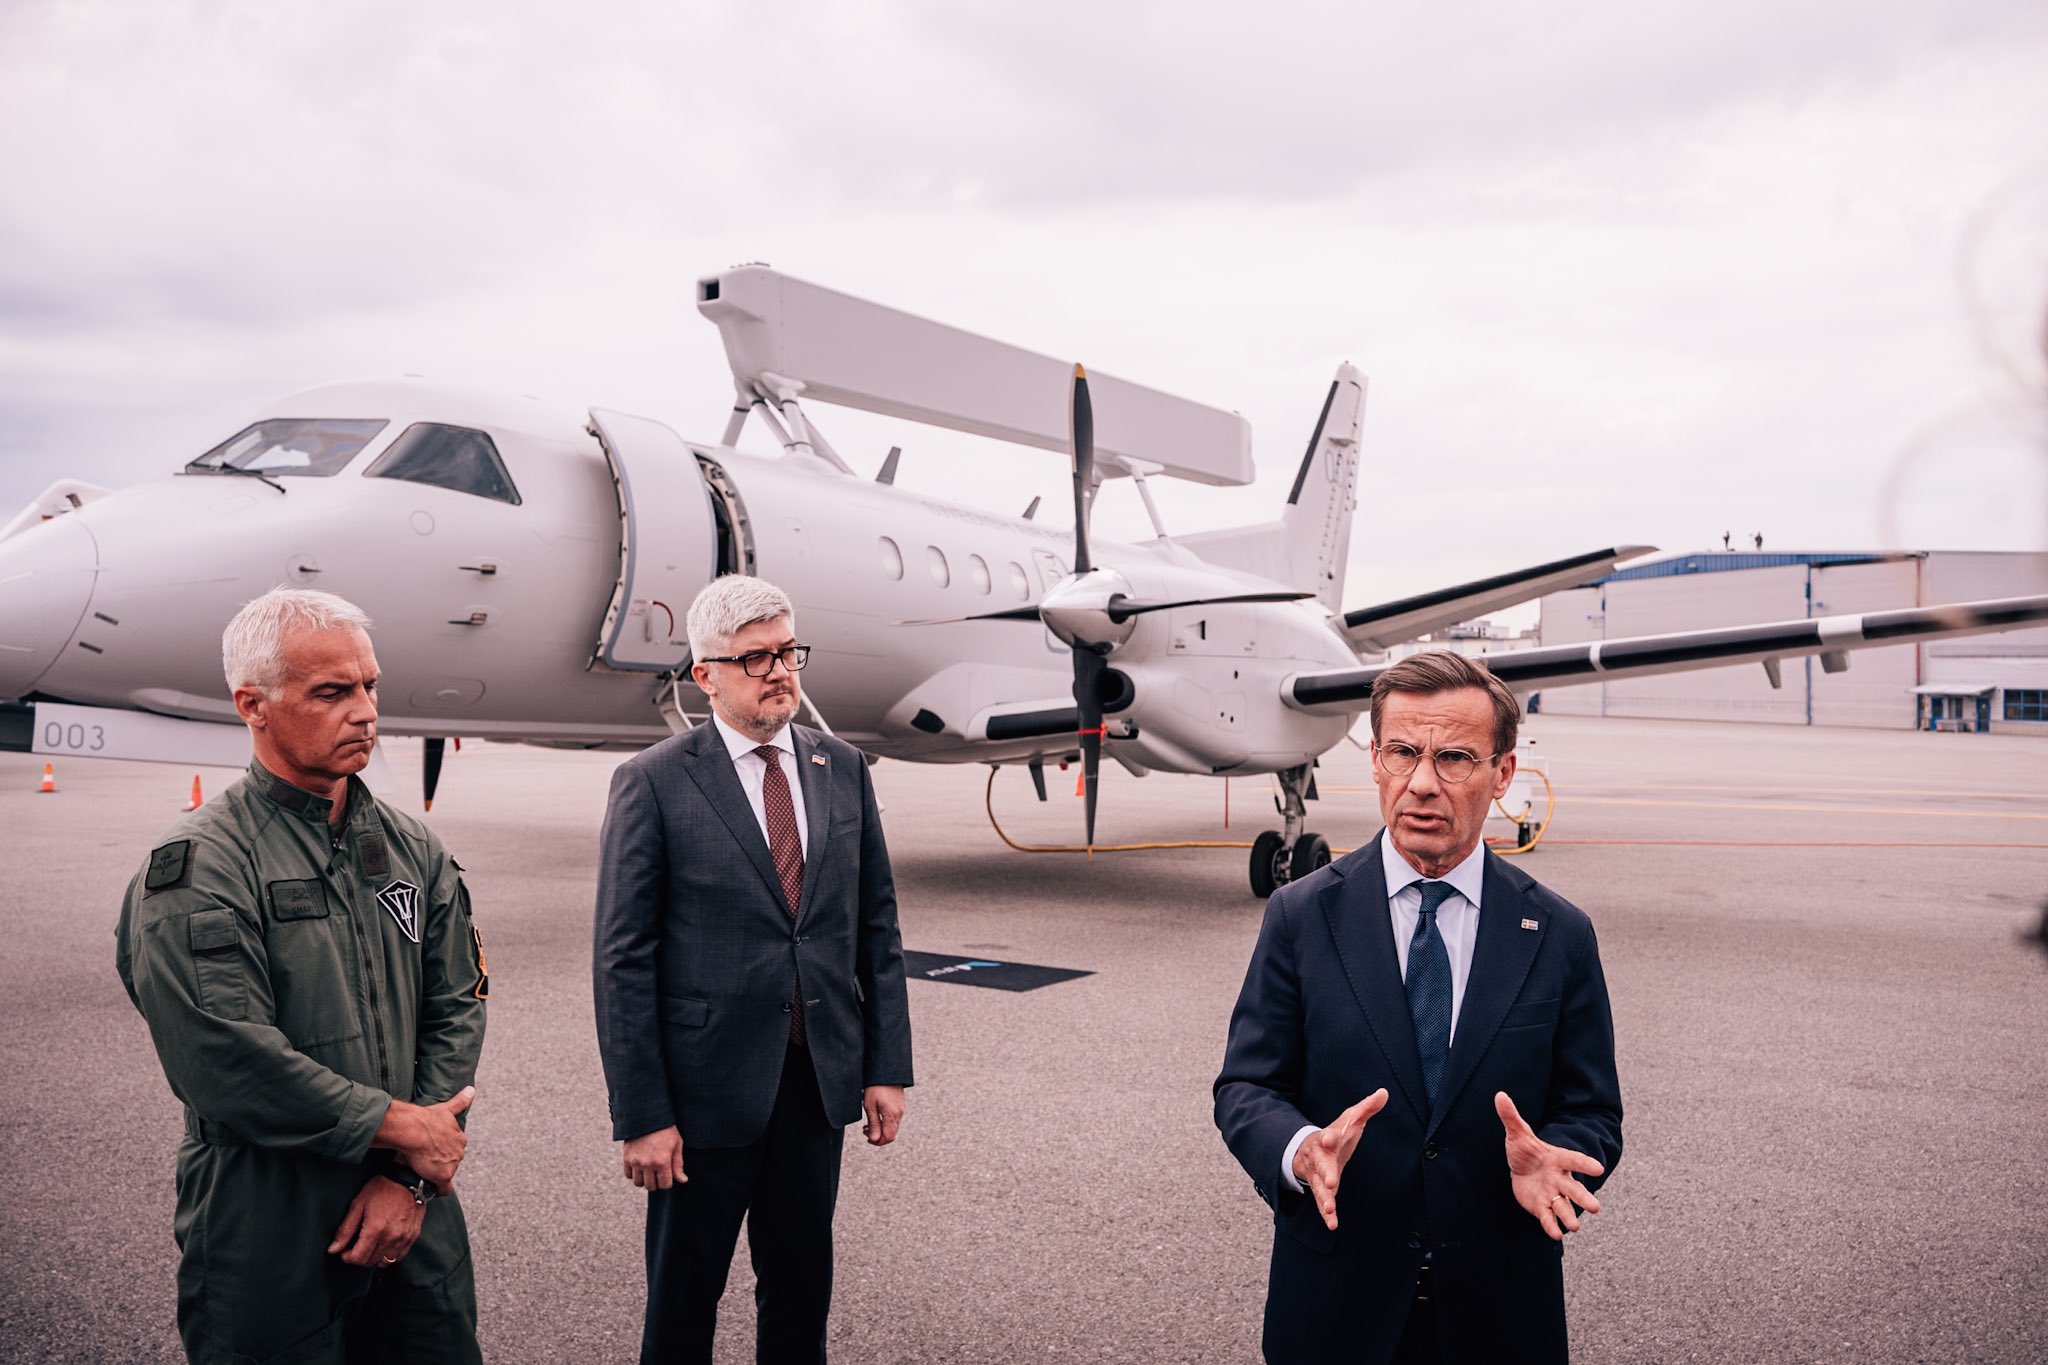 Sweden donates two ACS890 radar aircraft to Ukraine in new €1.16 billion aid package